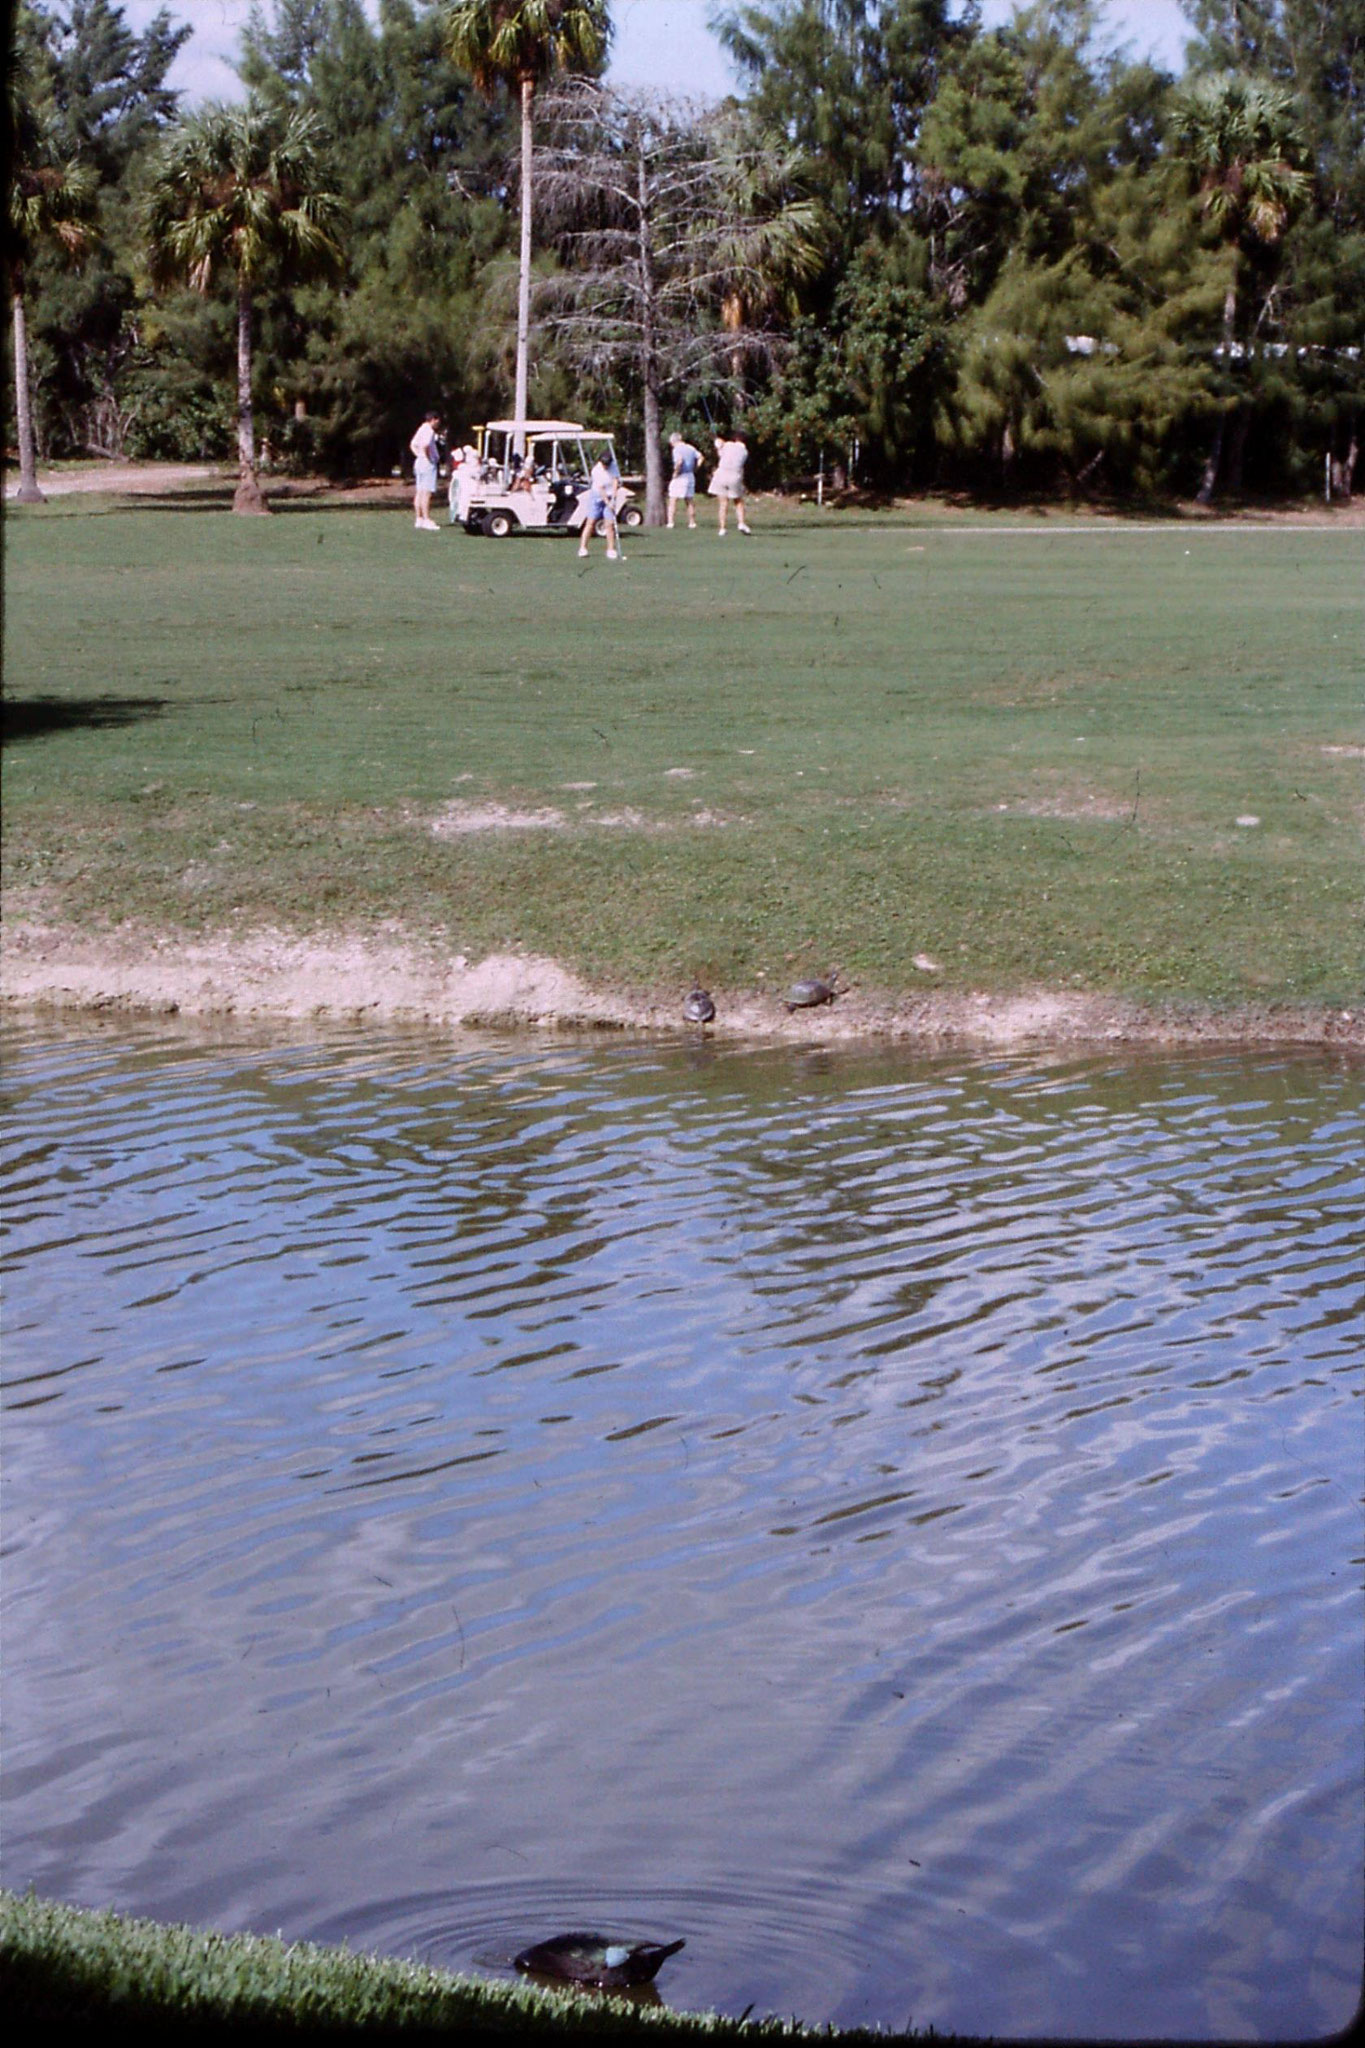 7/1/1991: 30: outside C's flat, golfers and turtles